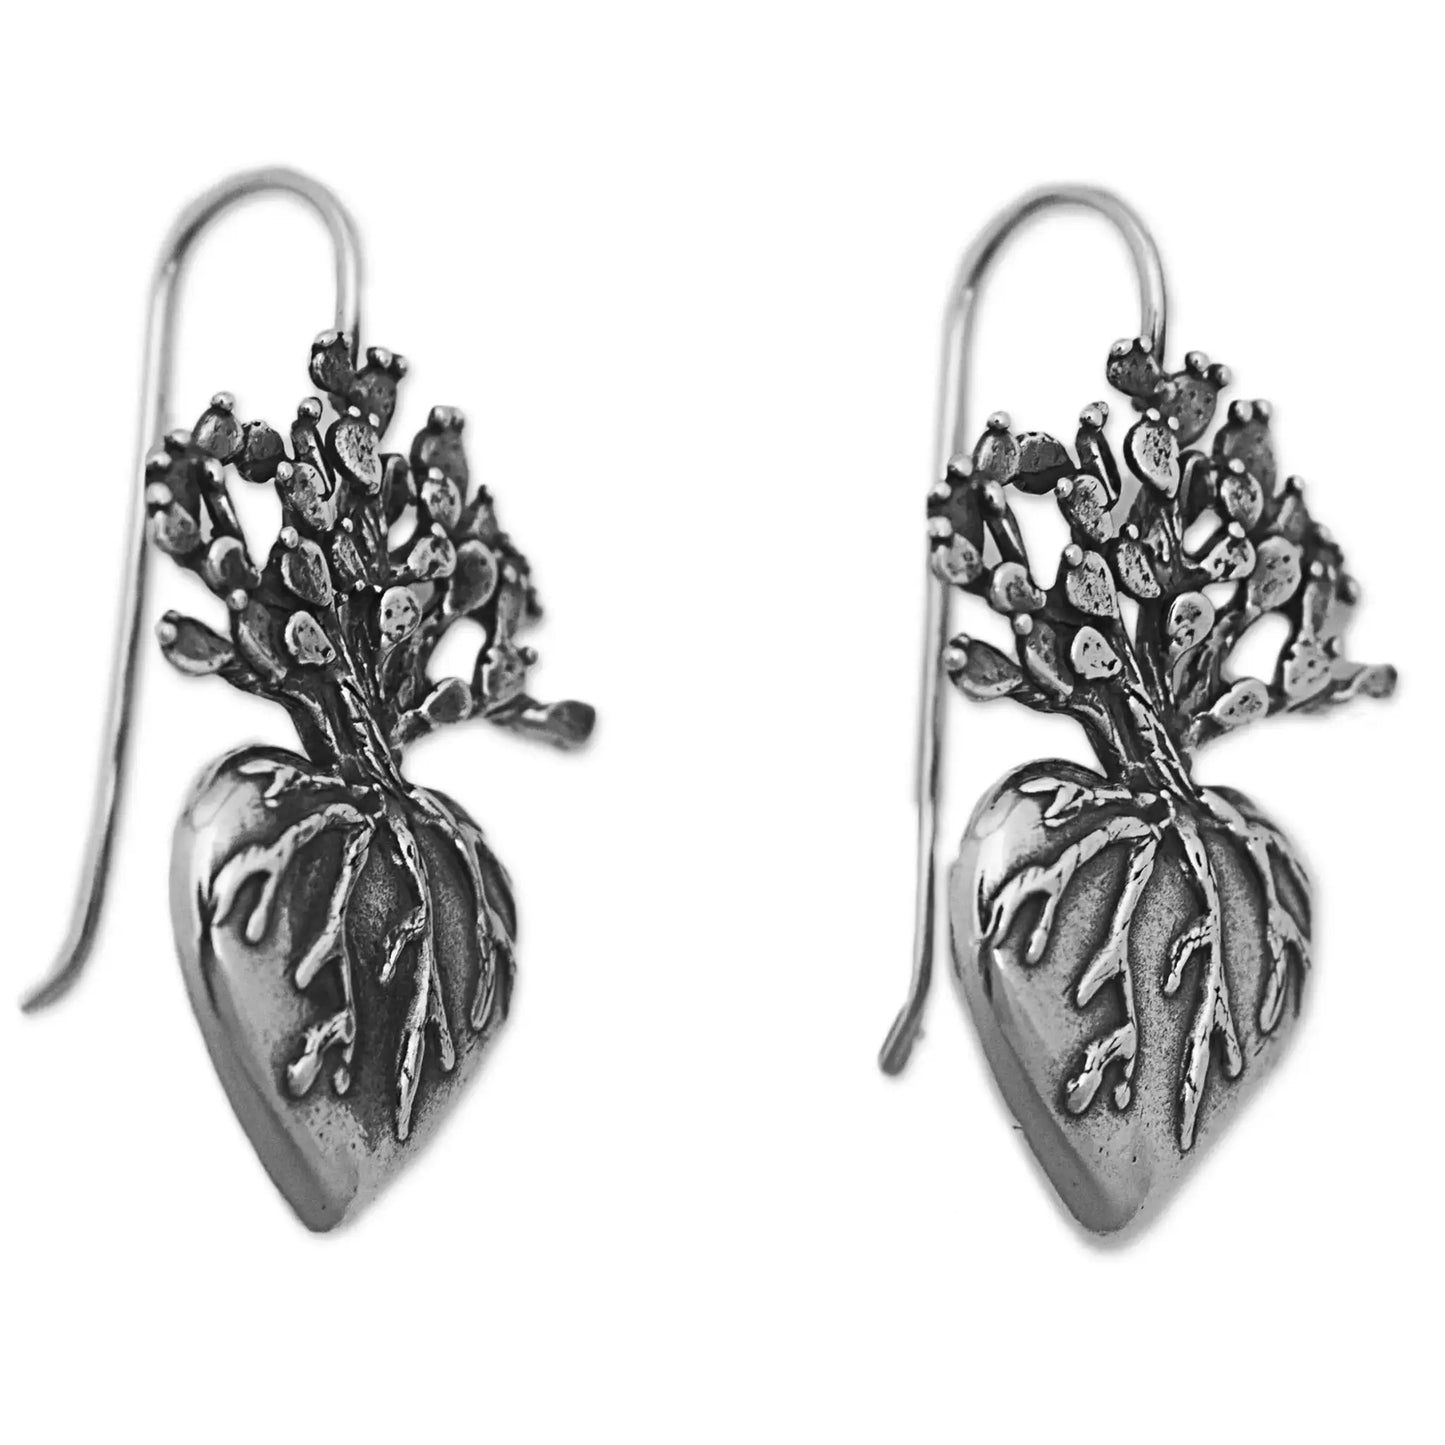 Cactus Affinity - Giant Silver Cactus Earrings